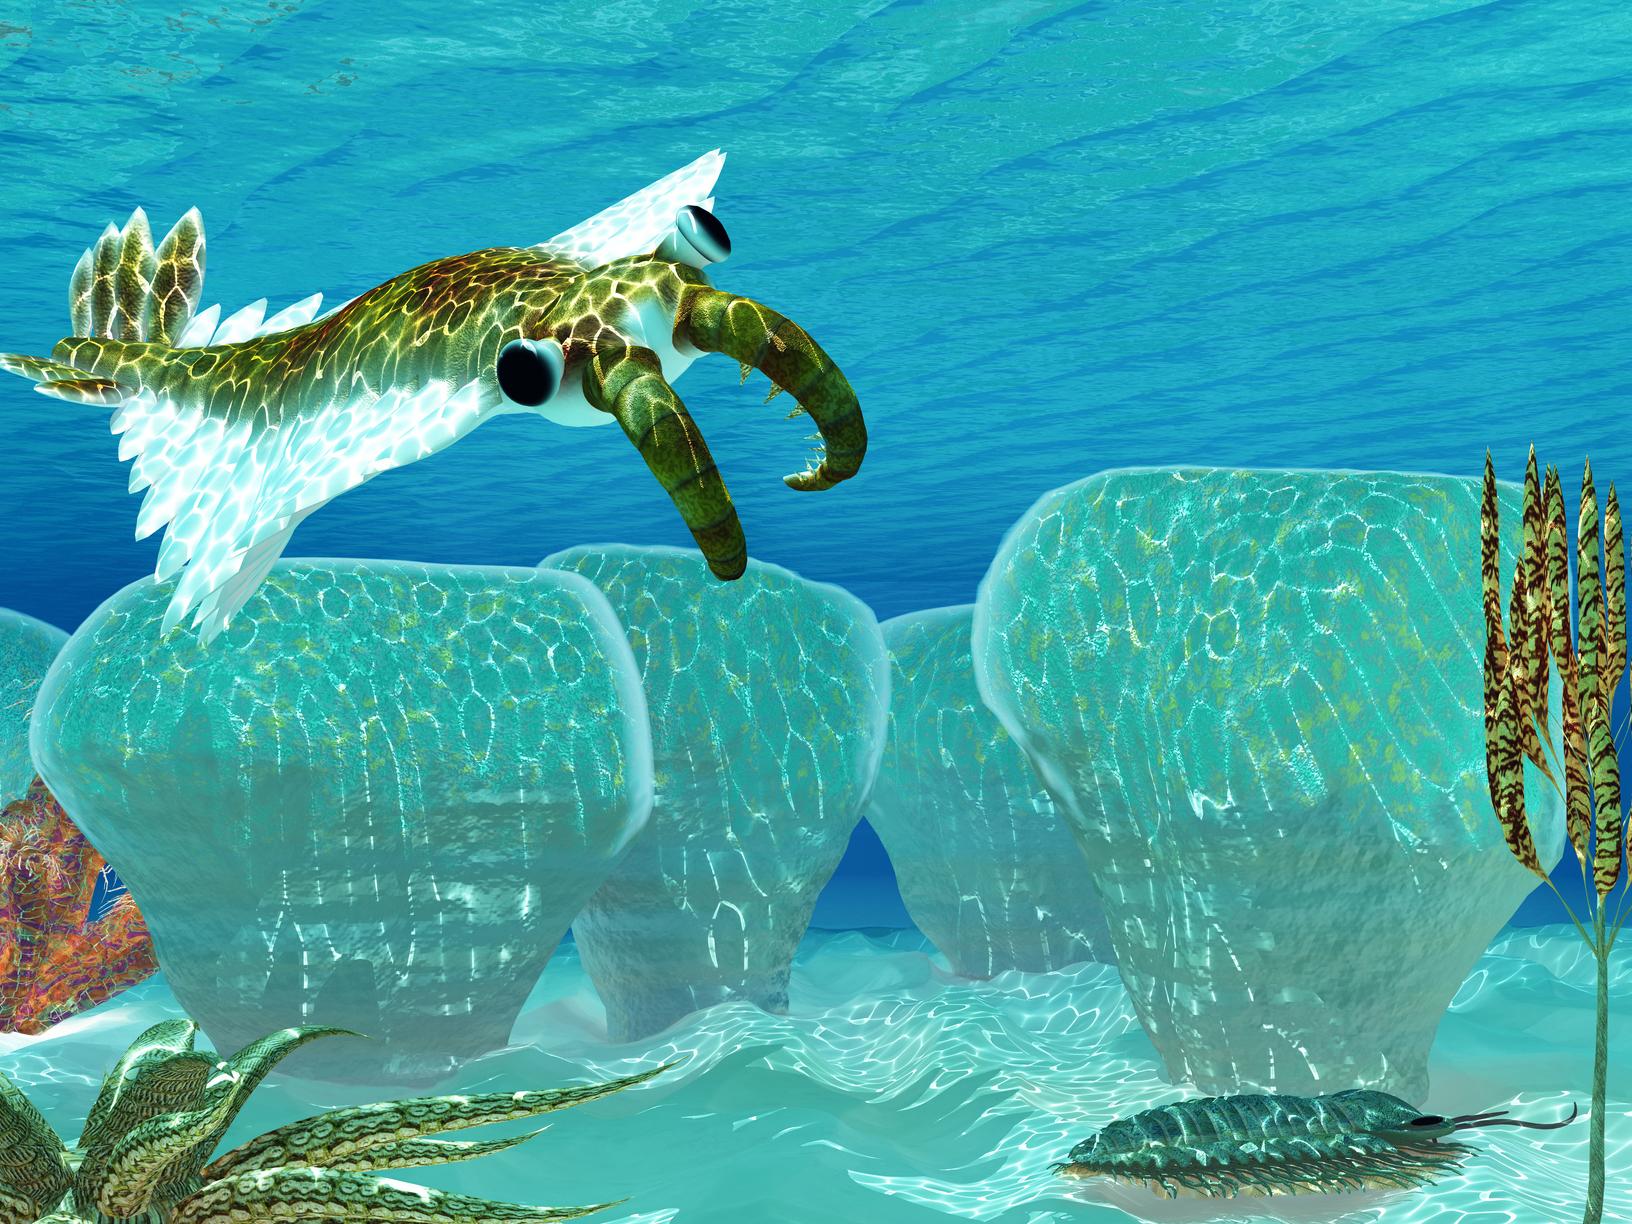 Anomalocaris was an invertebrate predator that emerged during the Cambrian explosion